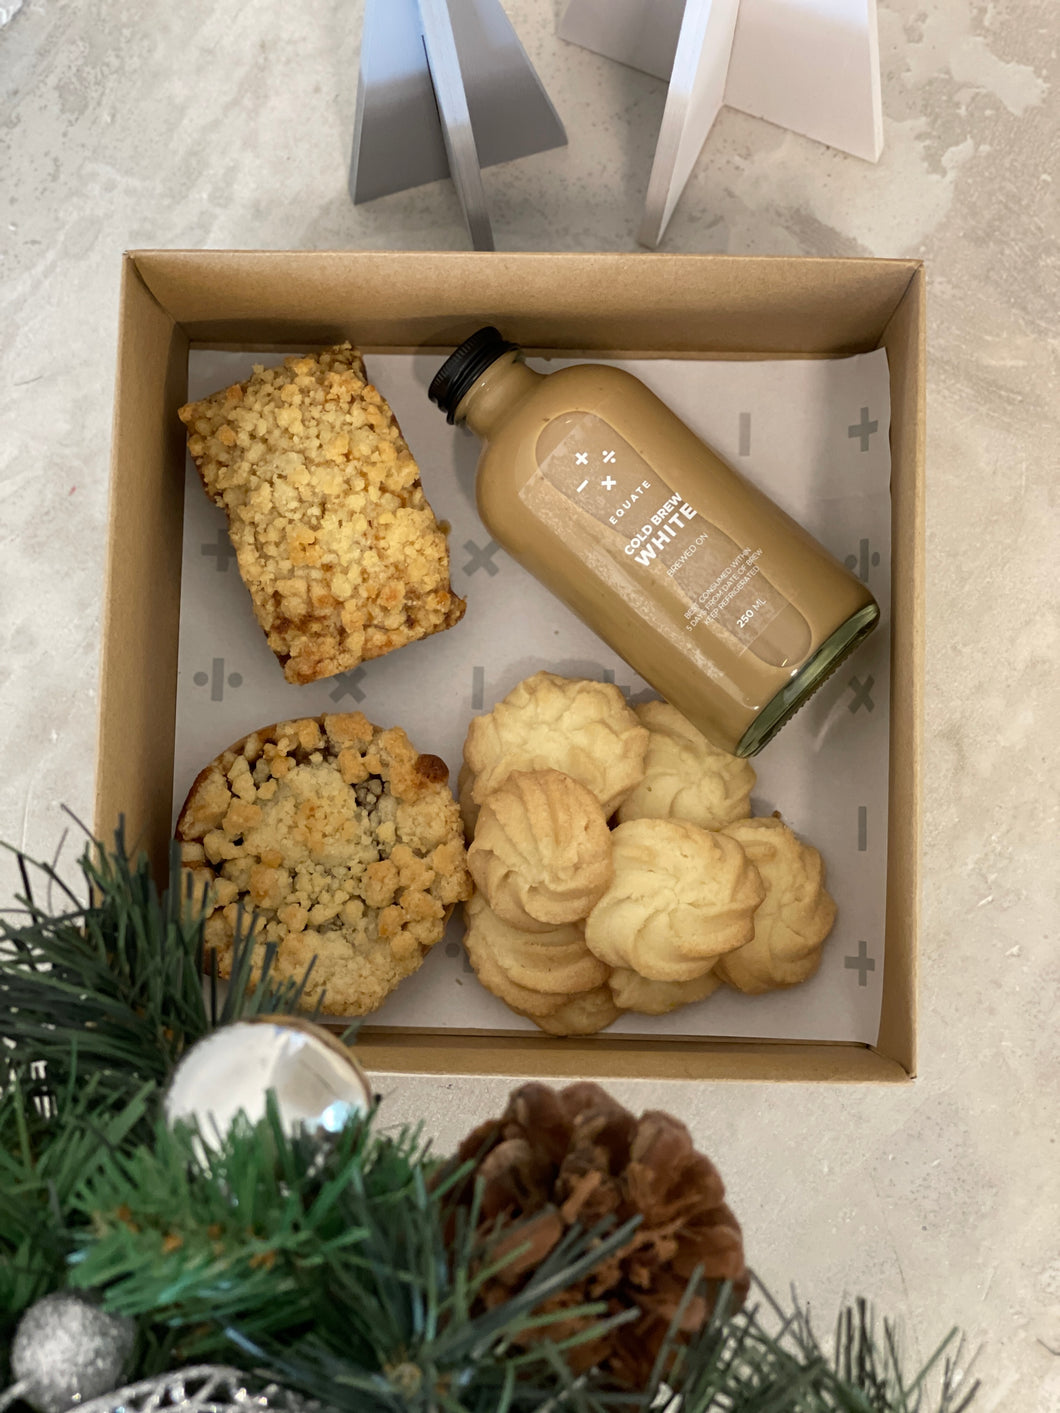 Equate x Thoughts Holiday Box